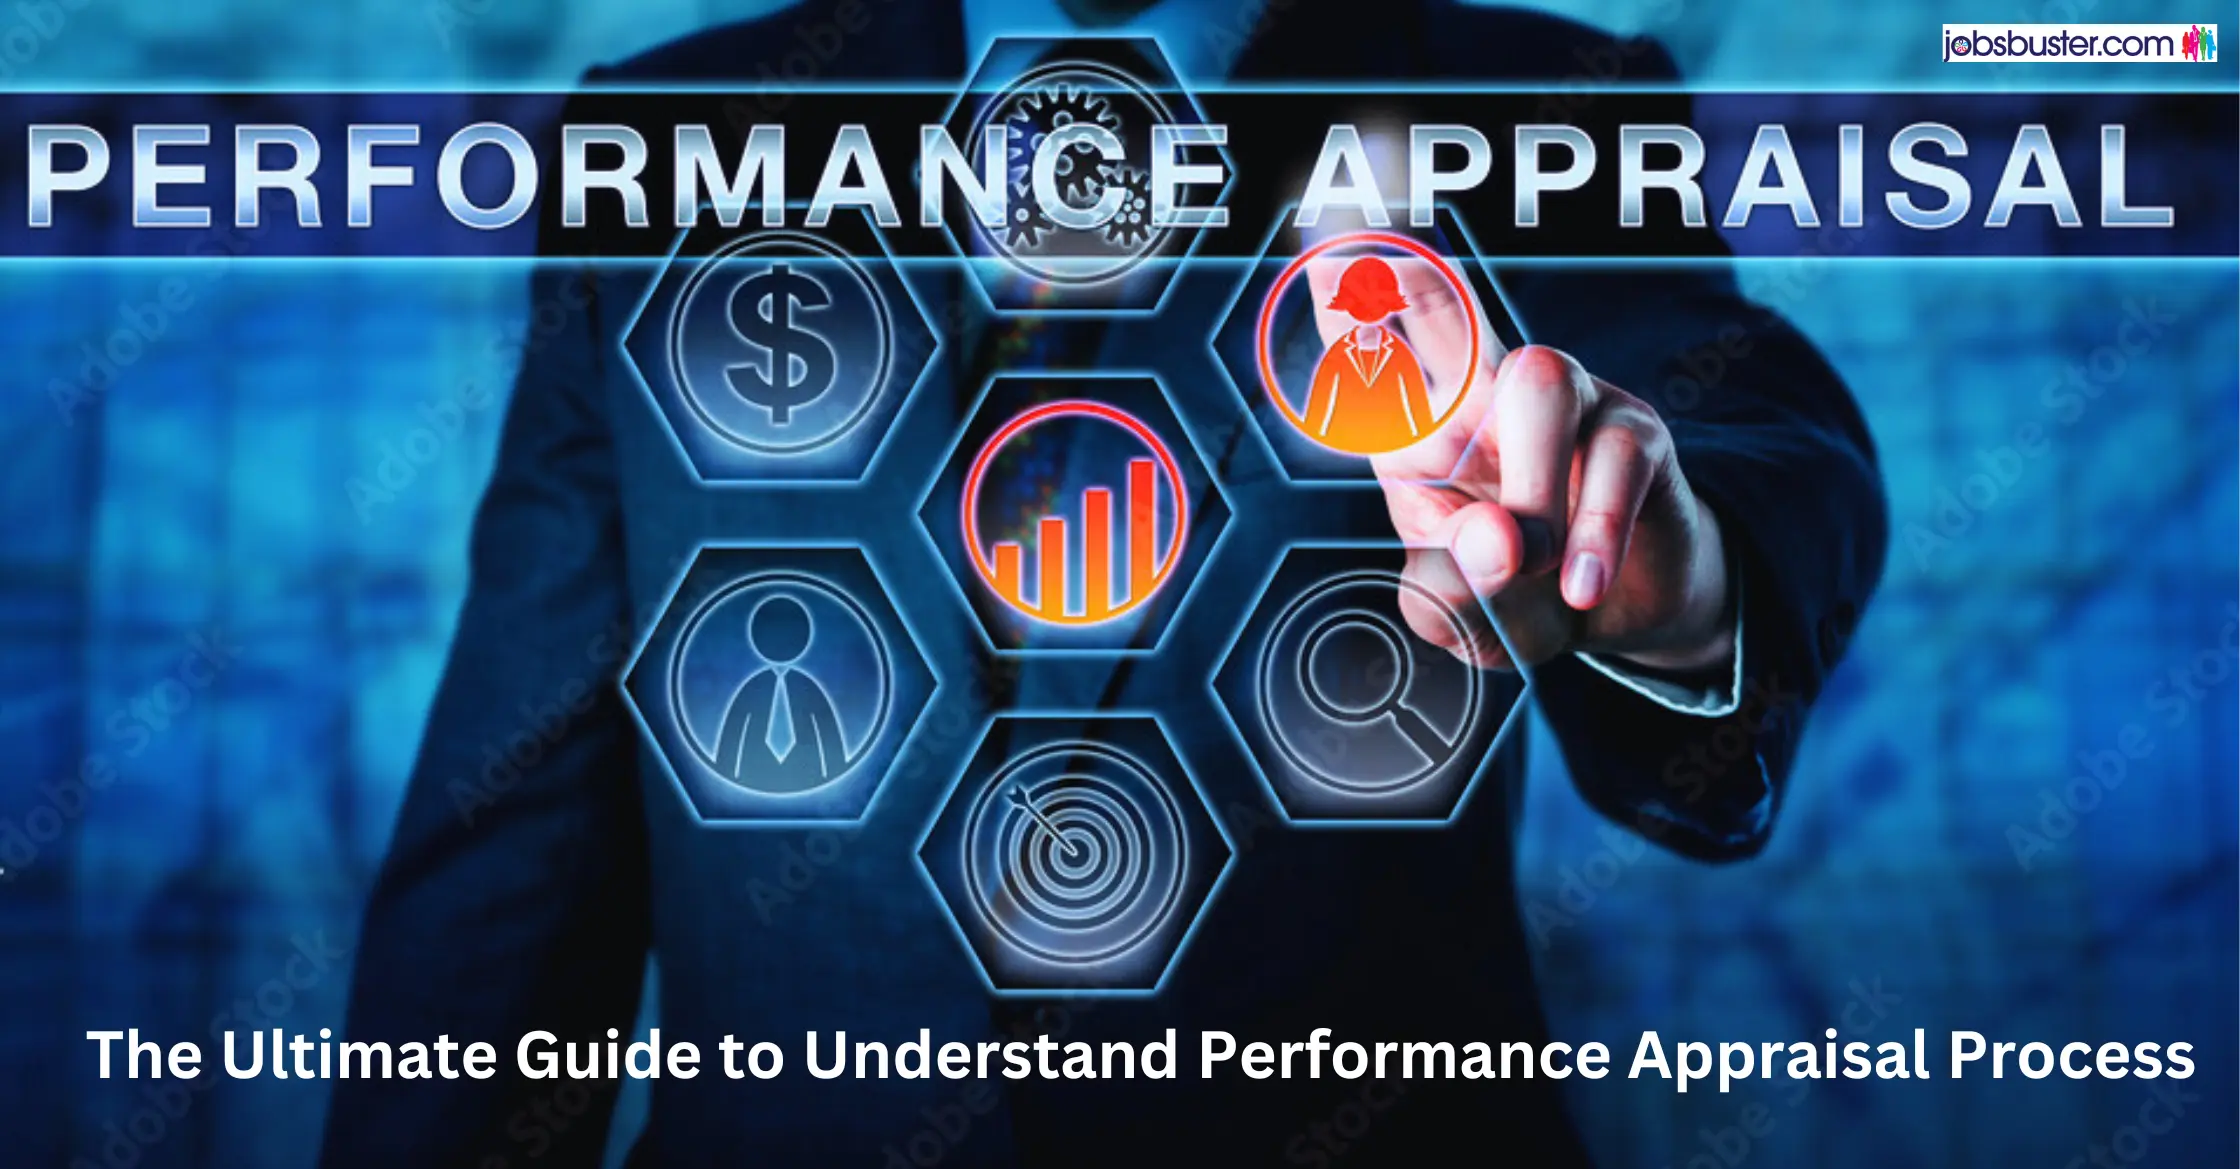 The Ultimate Guide to Understand Performance Appraisal Process